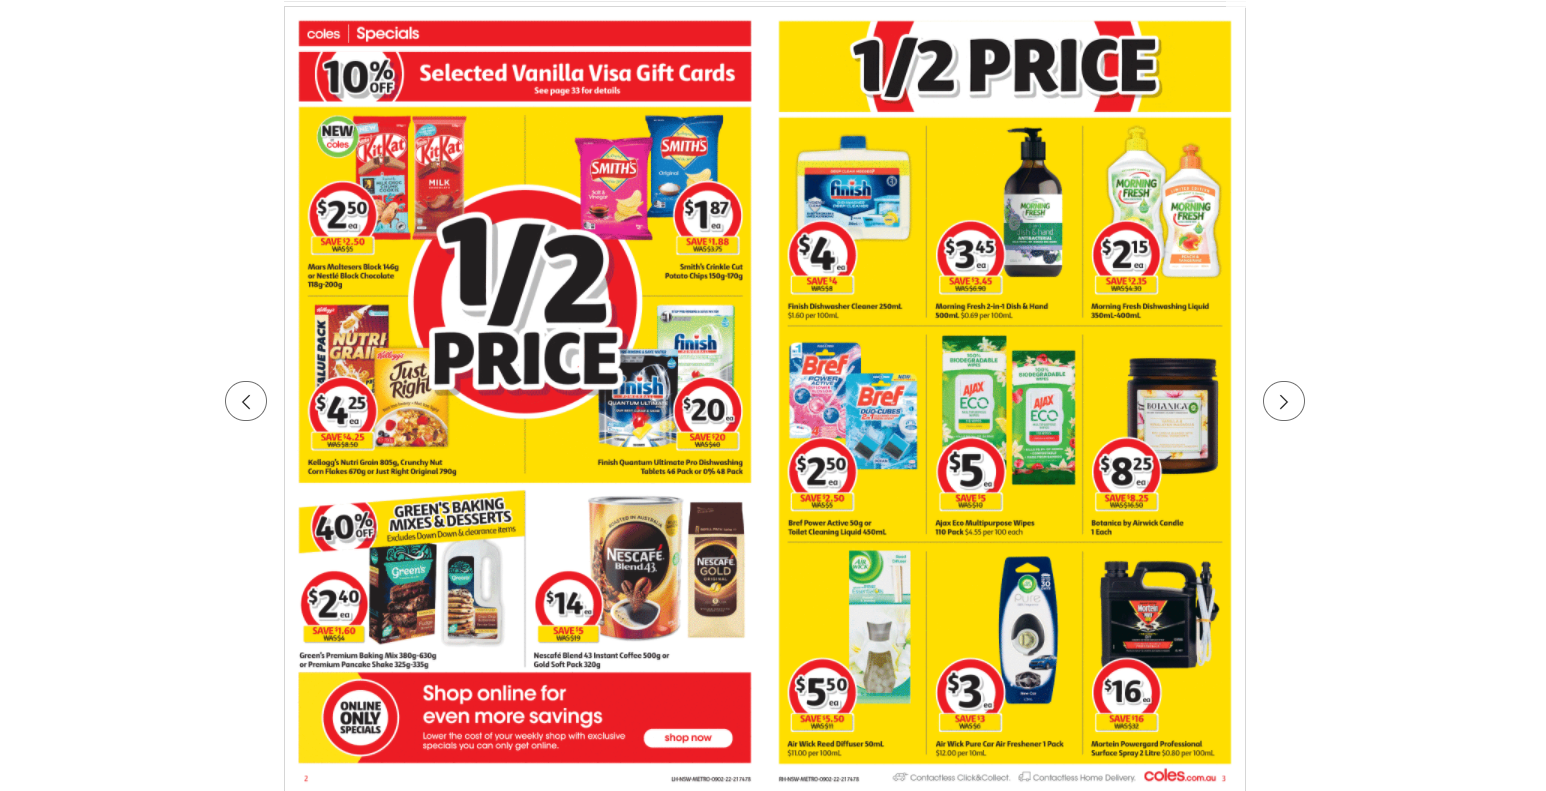 Coles this week's catalogue up to 50% OFF on groceries, beauty & everyday essentials(until 15th Feb)